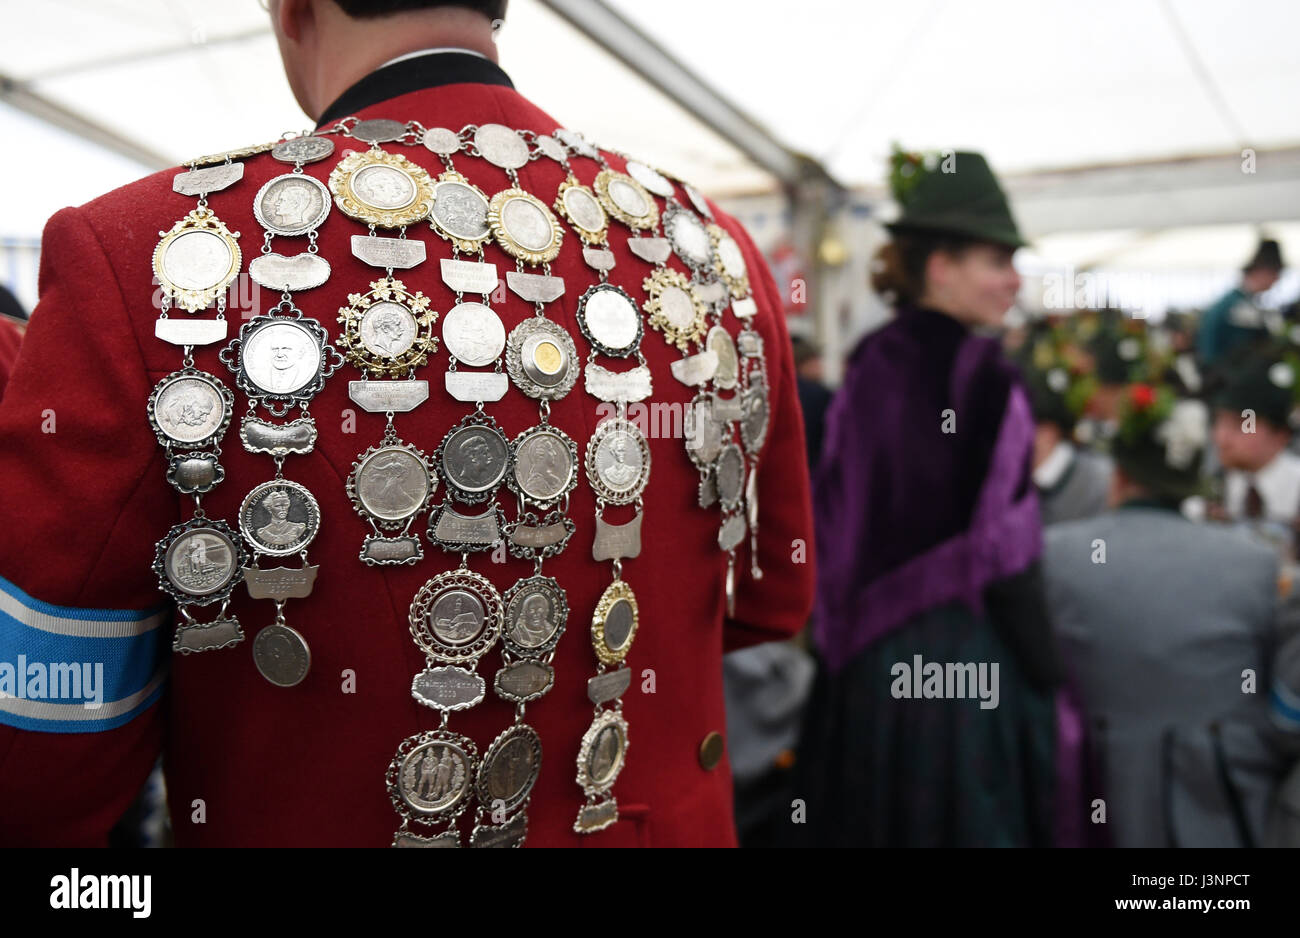 Gaissach, Germany. 7th May, 2017. A member of a traditional Bavarian Gebirgsschuetzen (lit. mountain marksmen) club wearing medals on his back during traditional Patronatstag feast day celebrations in Gaissach, Germany, 7 May 2017. The meeting takes place every May to honour the patron saint of the Gebirgsschuetzen, Mary the mother of Jesus. Photo: Andreas Gebert/dpa/Alamy Live News Stock Photo